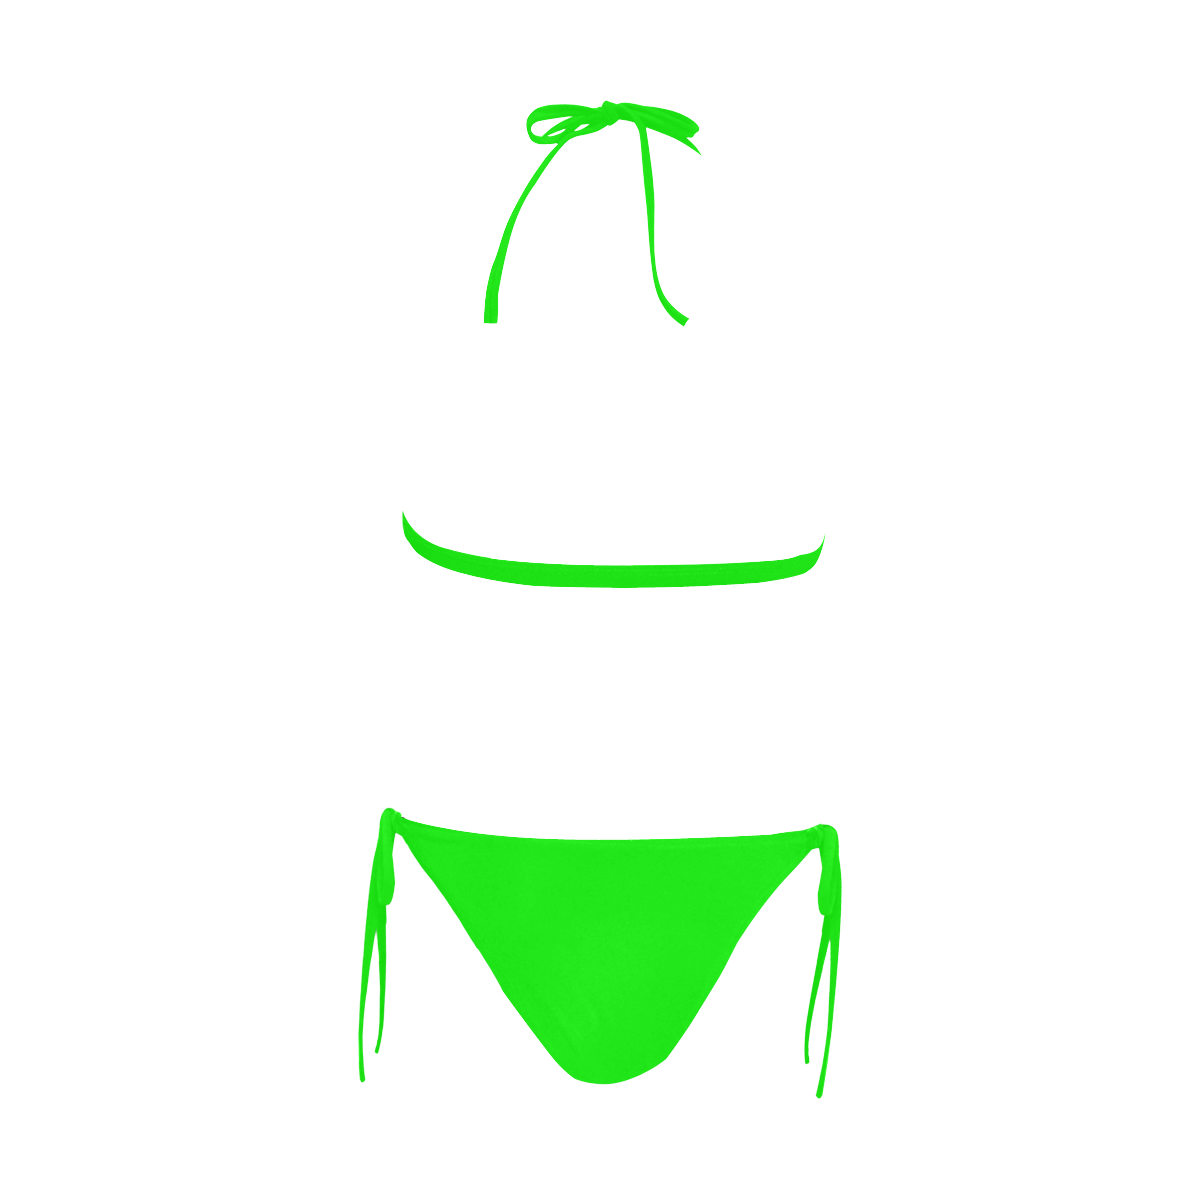 Bright Neon Yellow and Green Buckle Front Halter Bikini Swimsuit (Model S08)